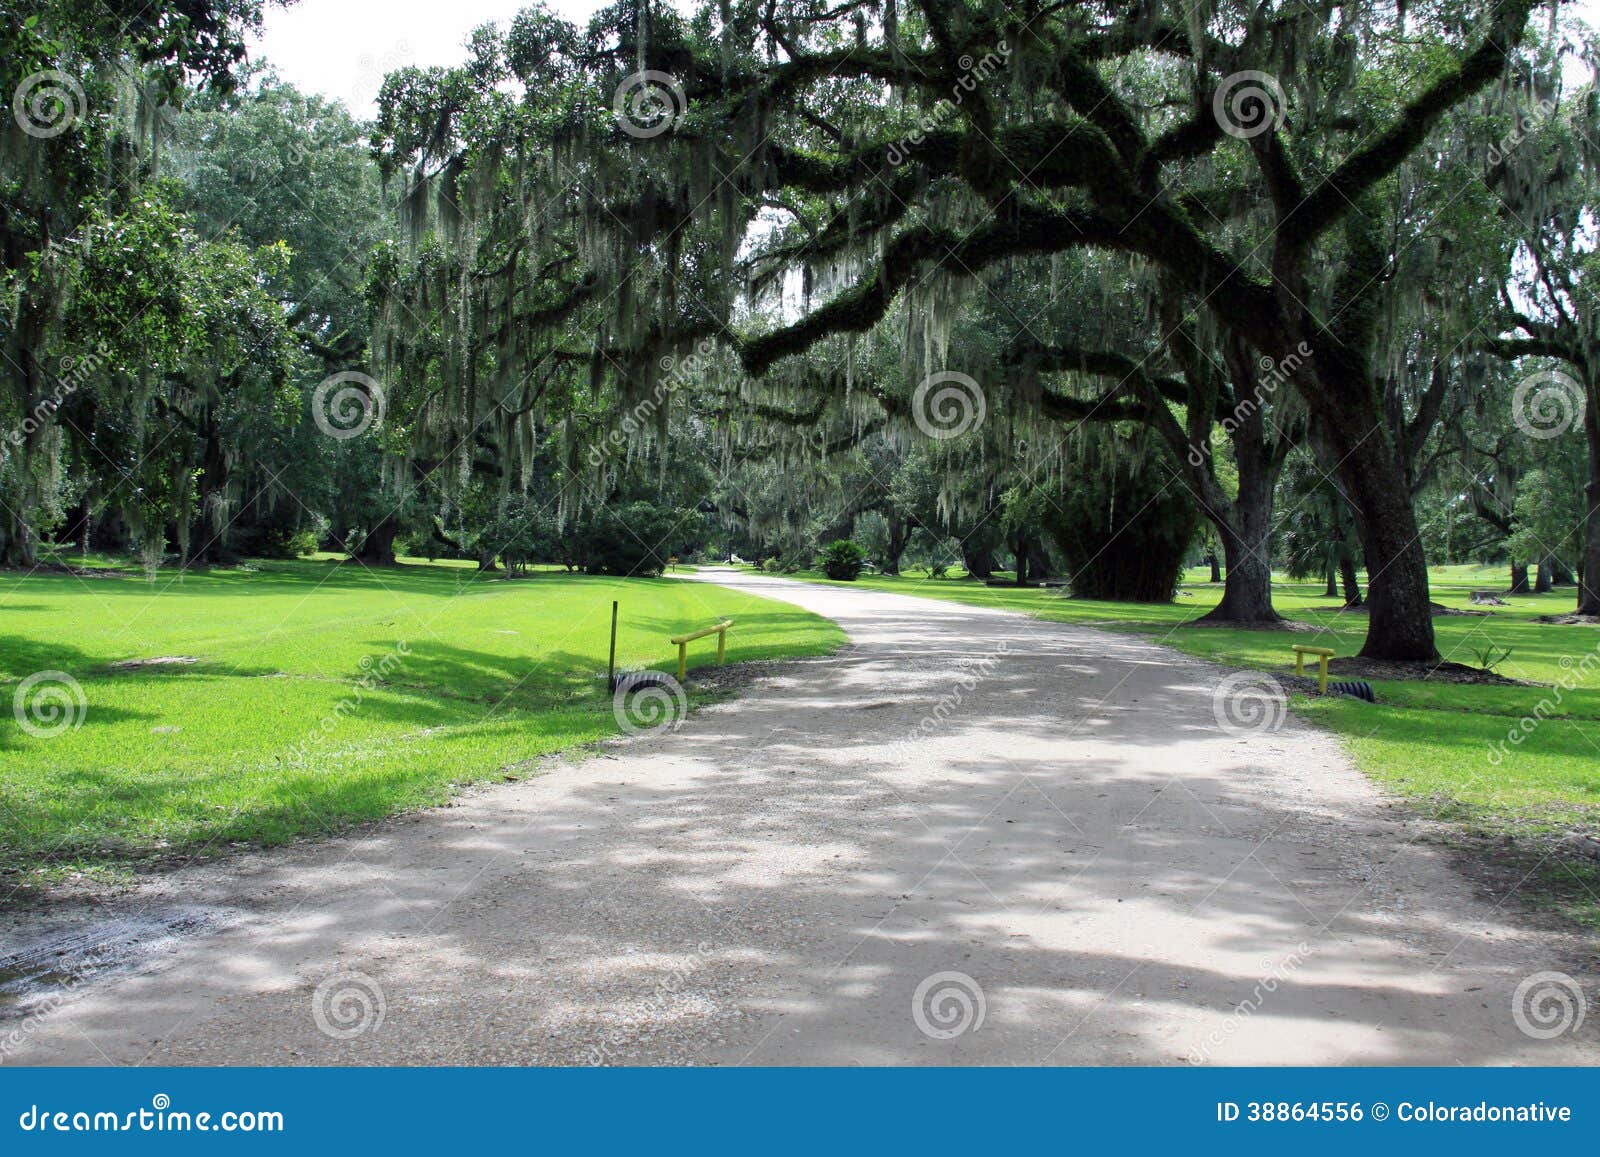 spanish moss hanging from trees along a road